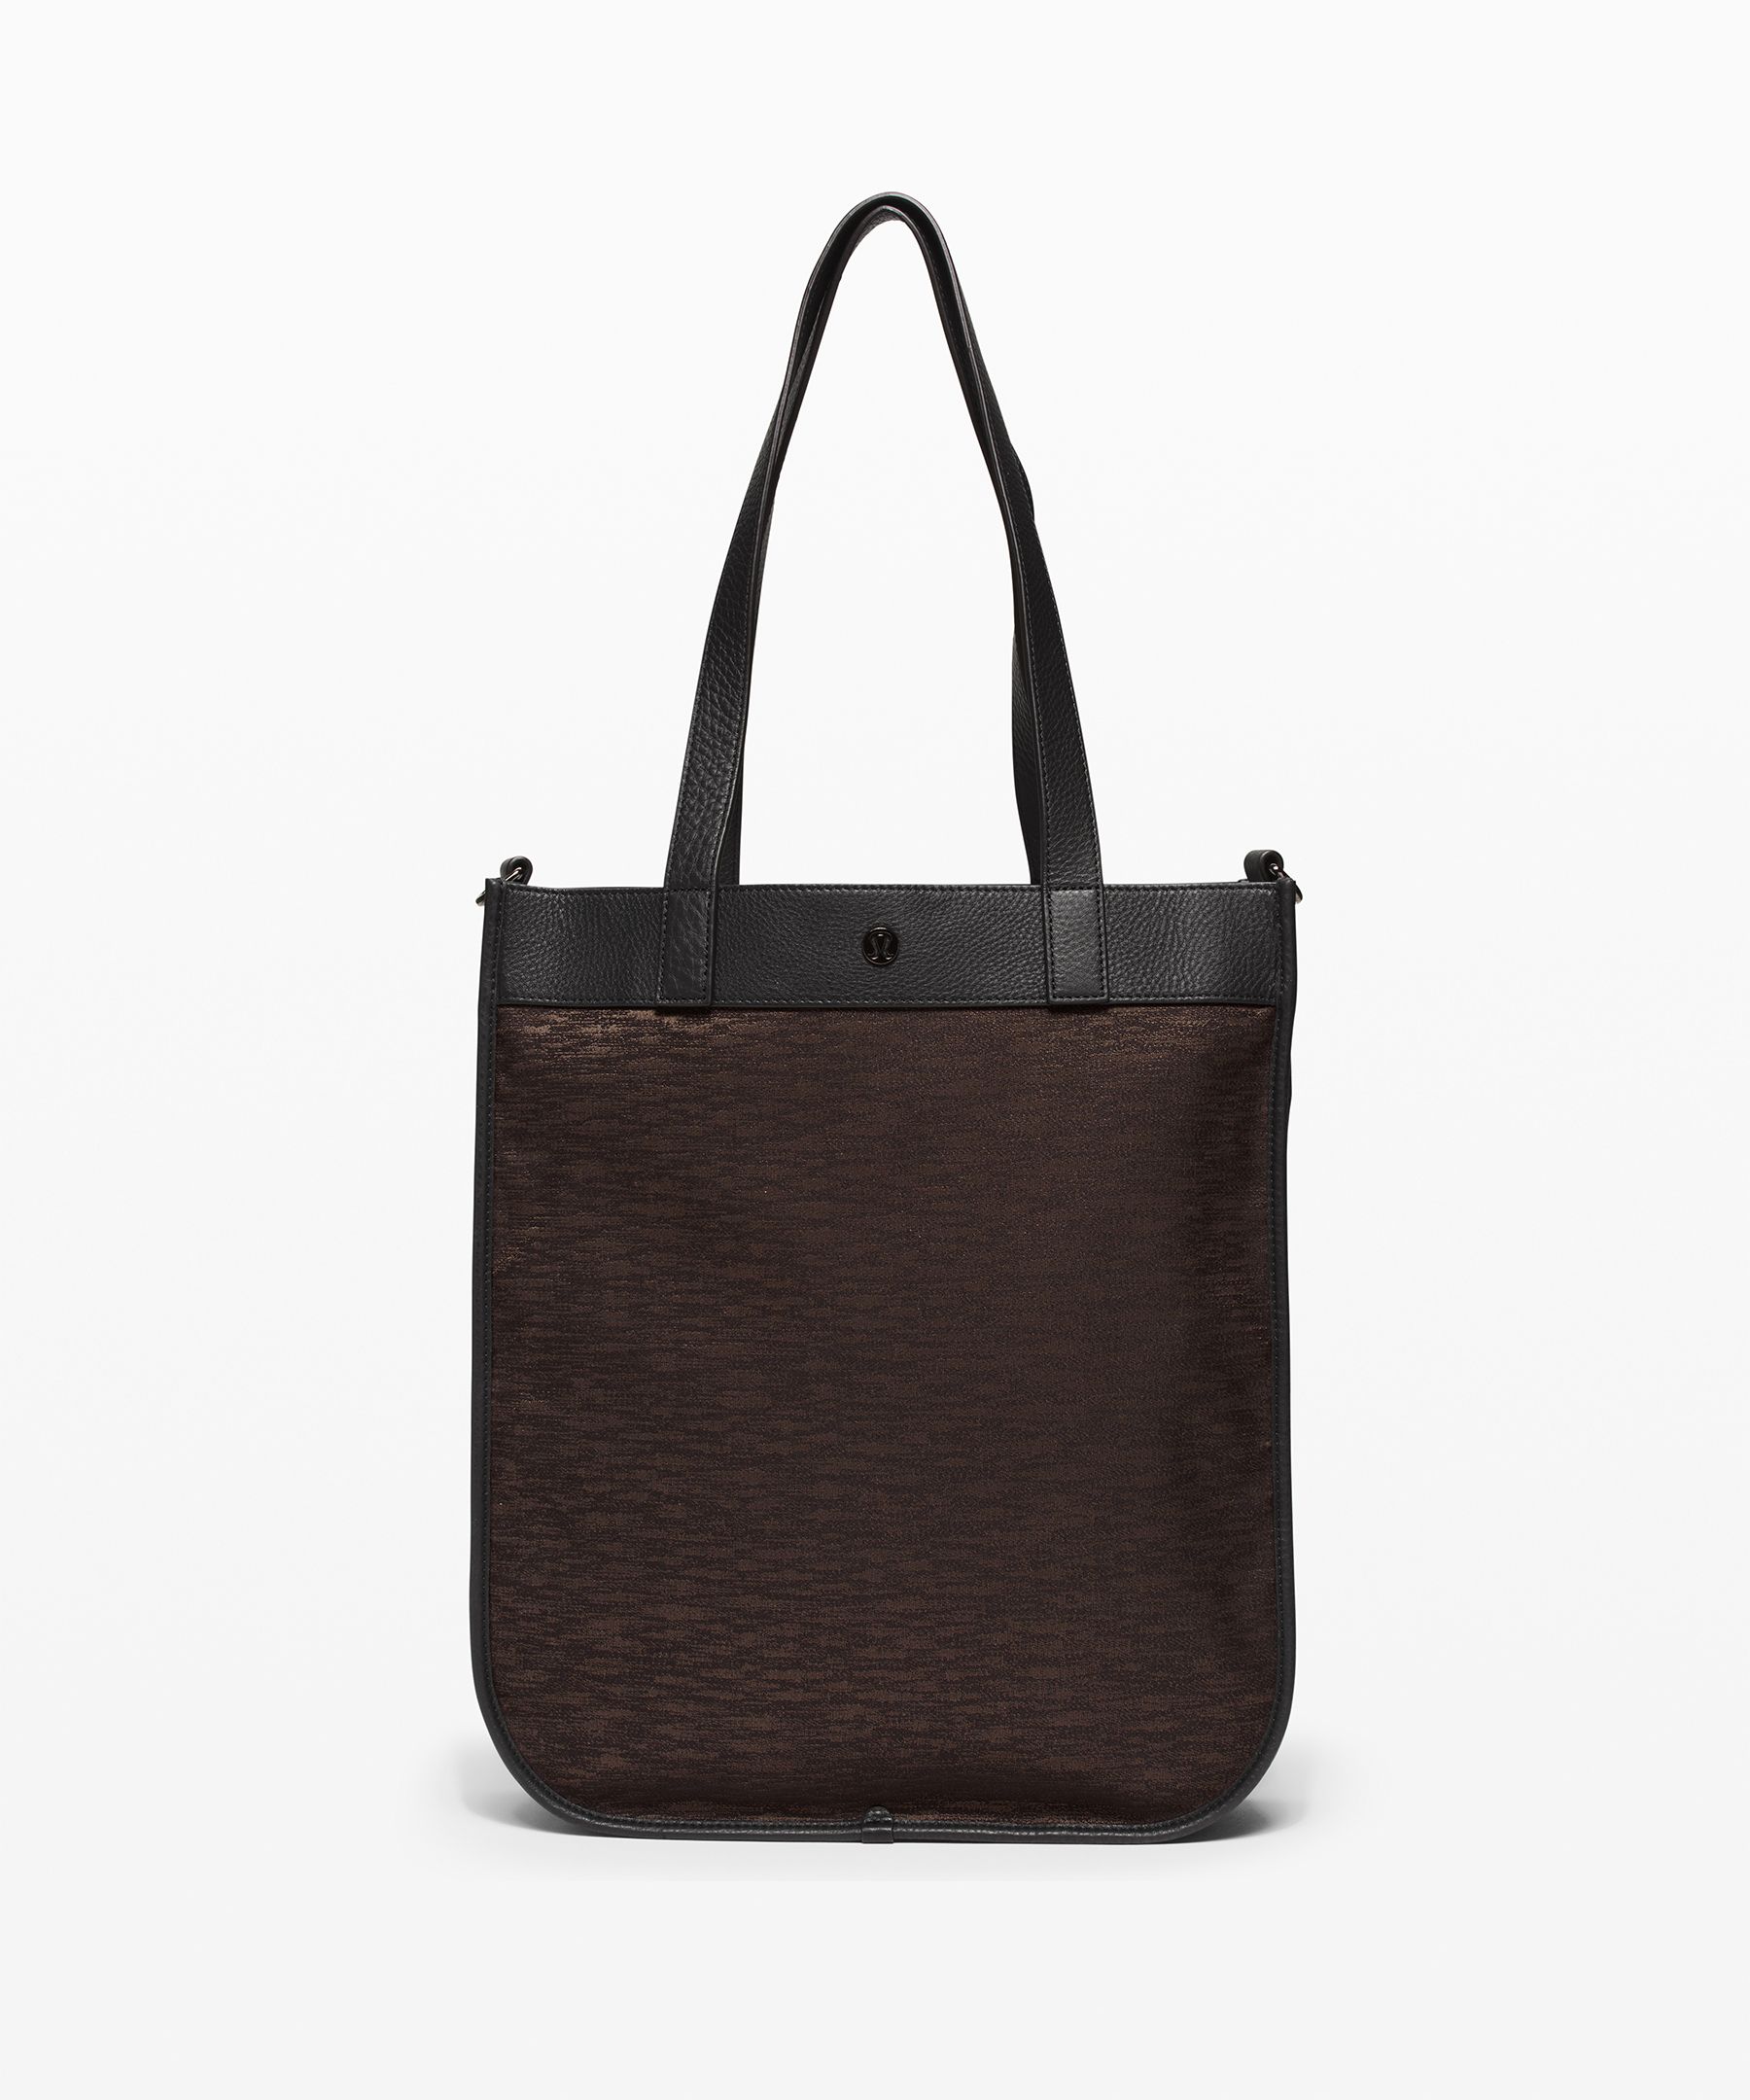 Lululemon Now And Always Tote *15l In Black